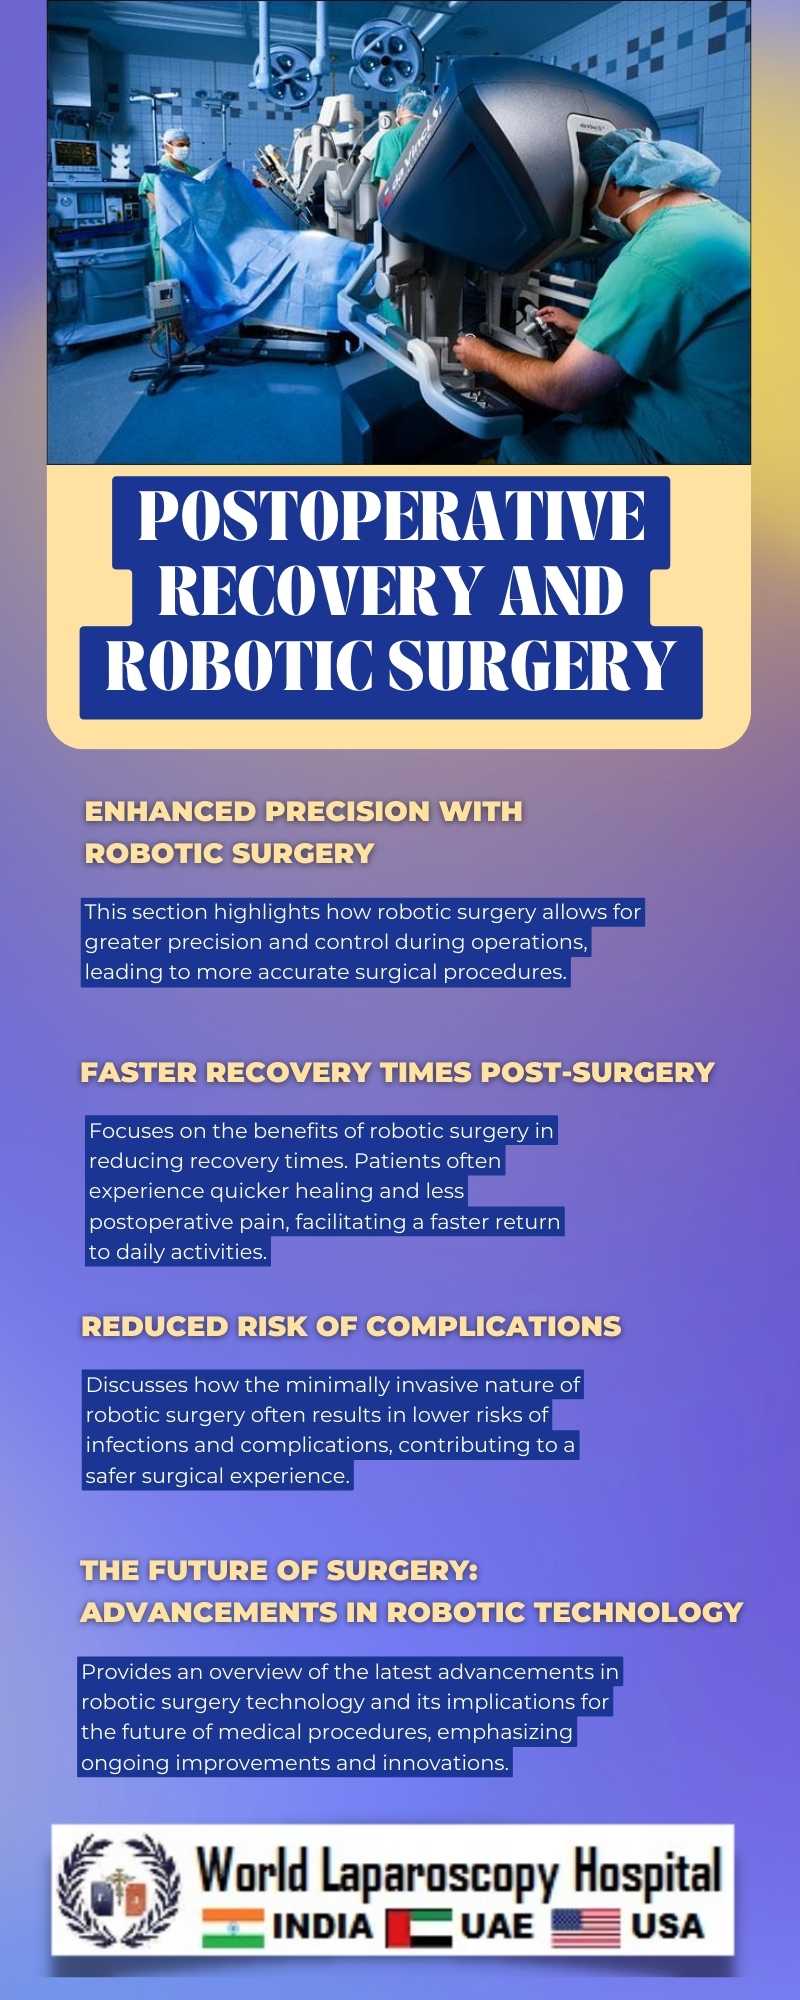 Postoperative Recovery and Robotic Surgery: A Comparative Study